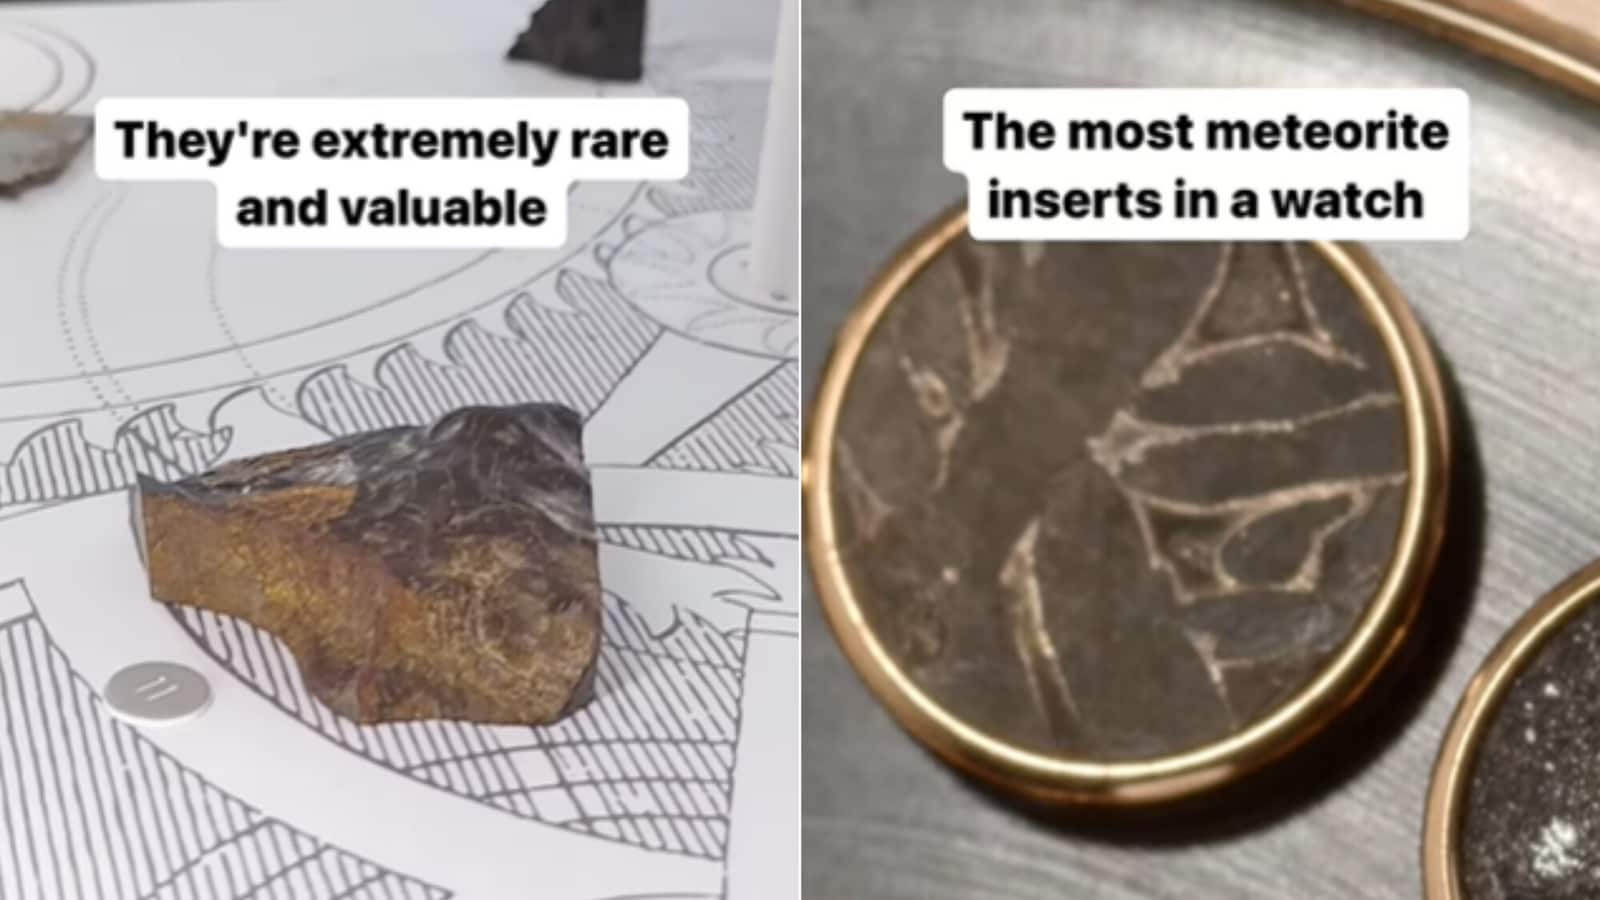 Watch with 12 meteorite inserts from ‘Moon, Mars and space’ breaks world record